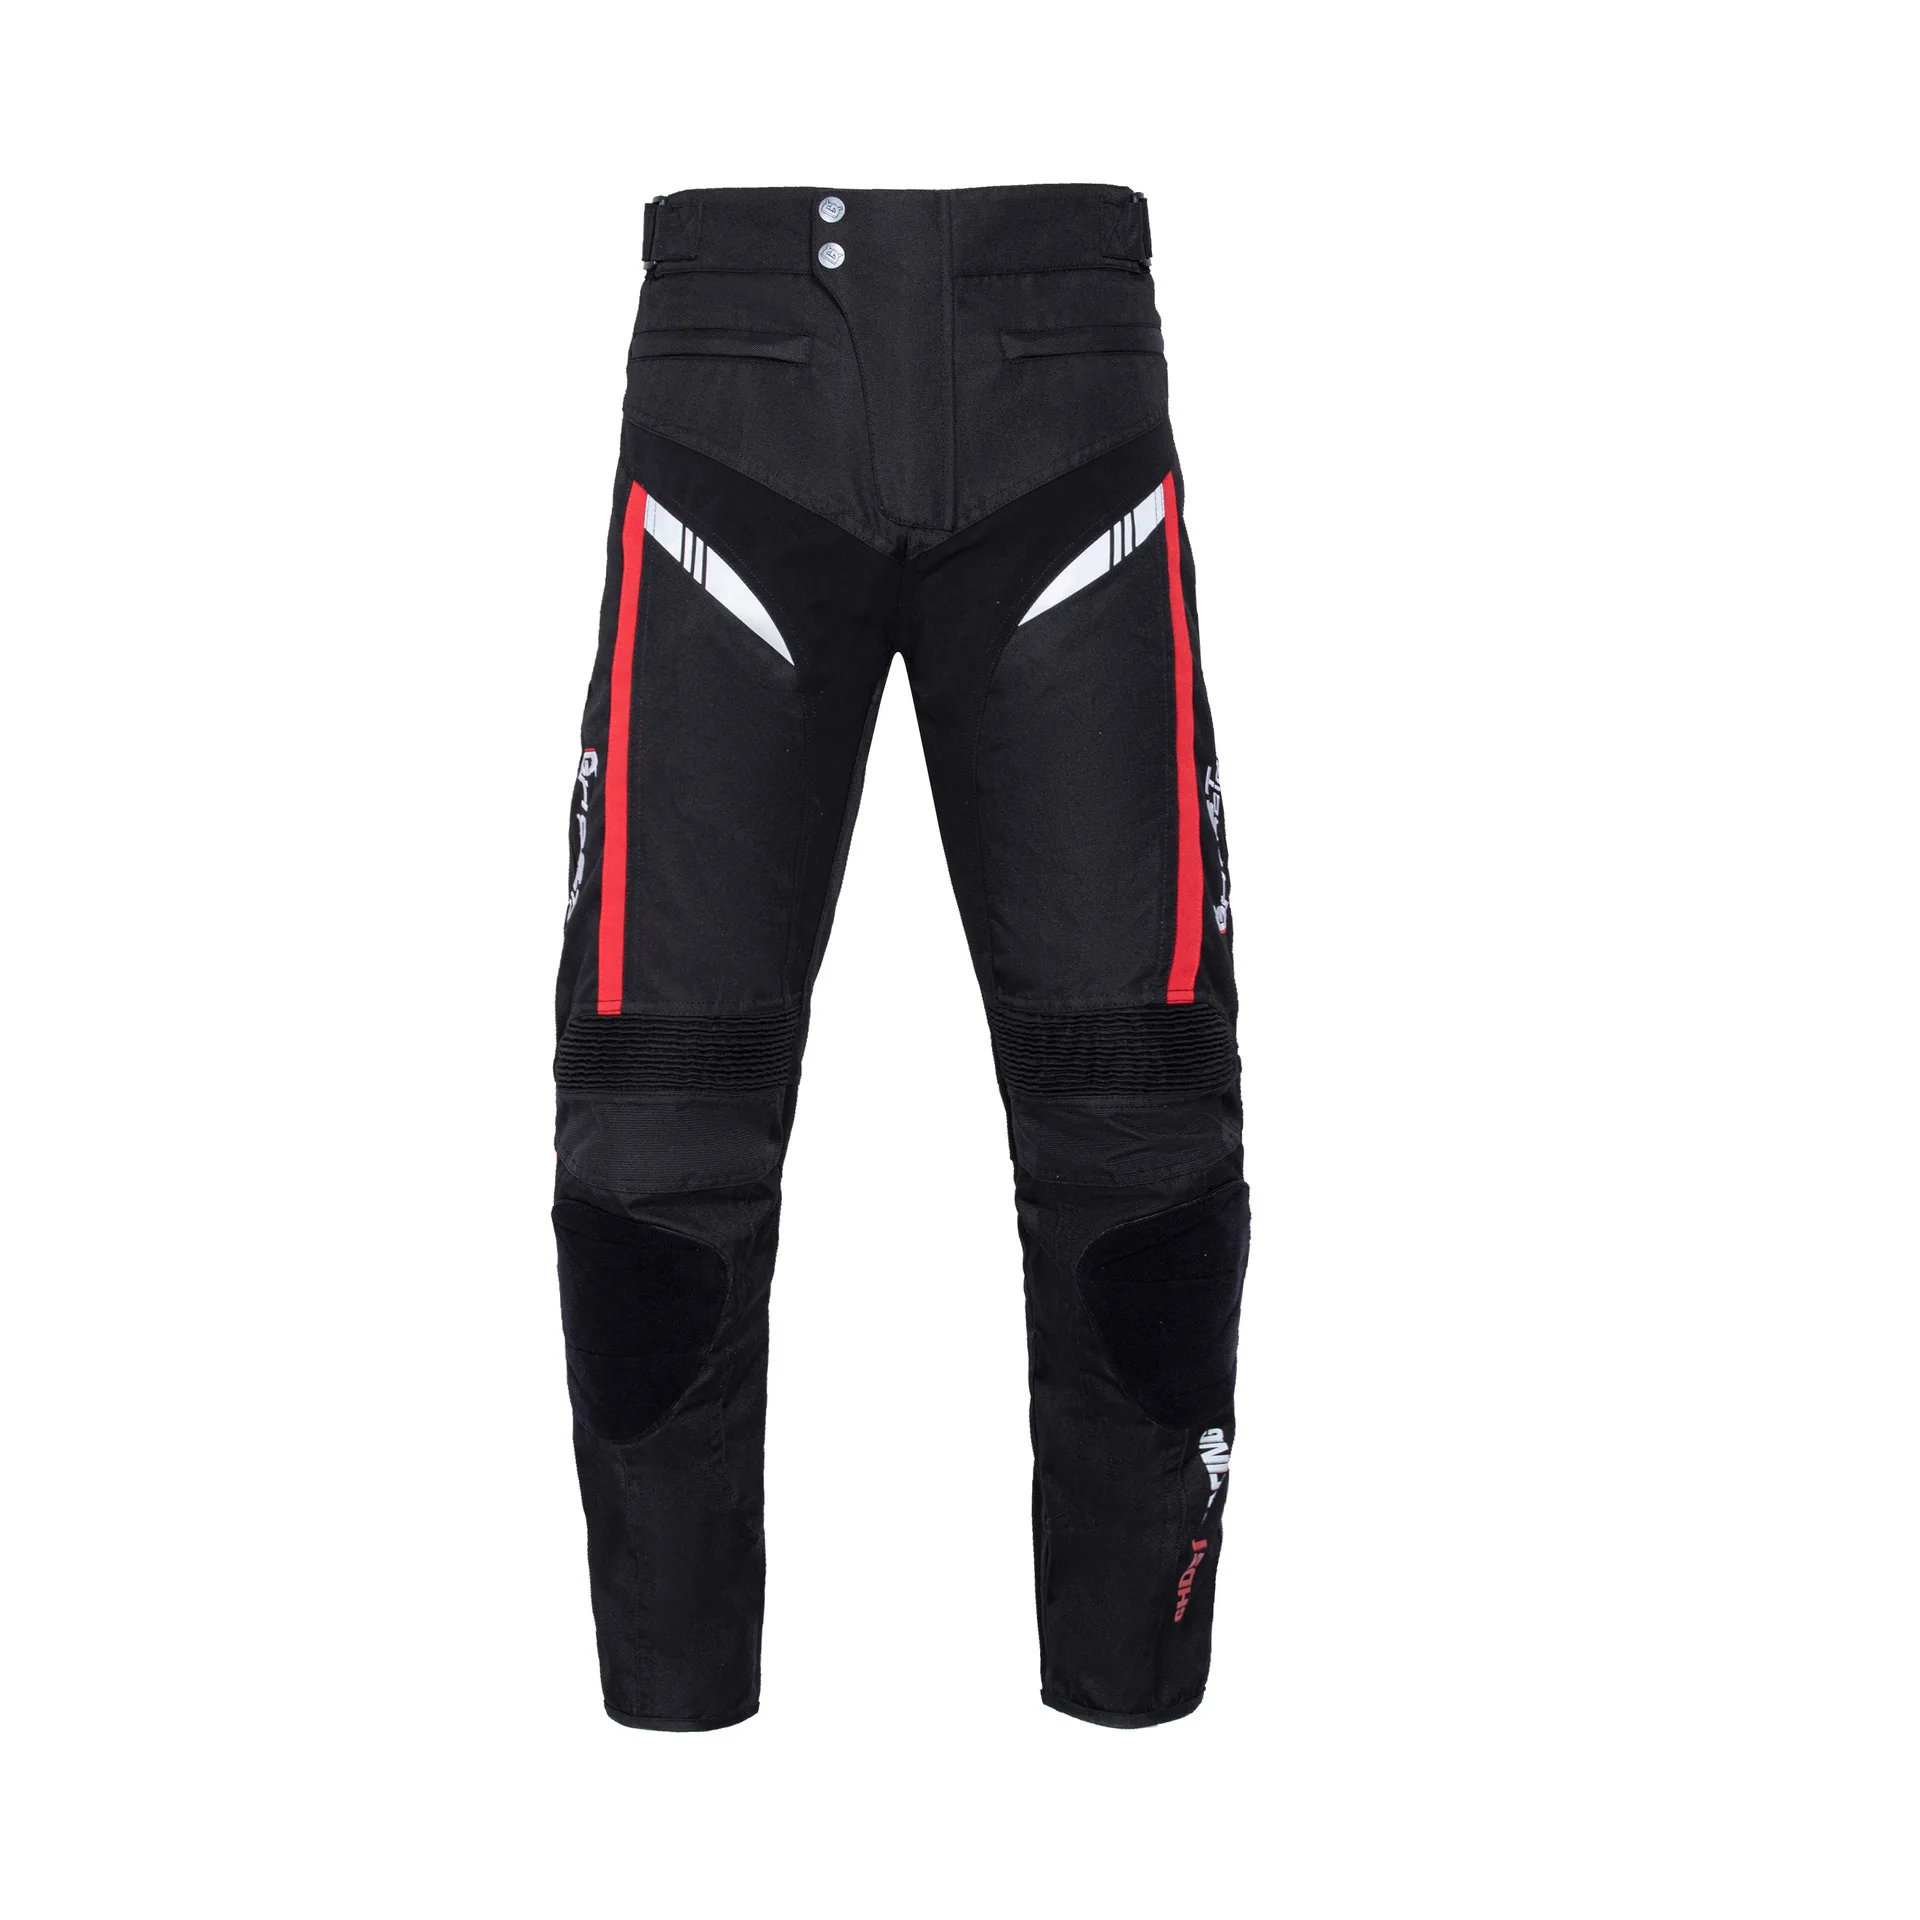 GHOST RACING Motorcycle Pants Men Winter Cold Proof Moto Pants Night Reflection Motorbike Protective Trousers Have Cotton Lining enlarge